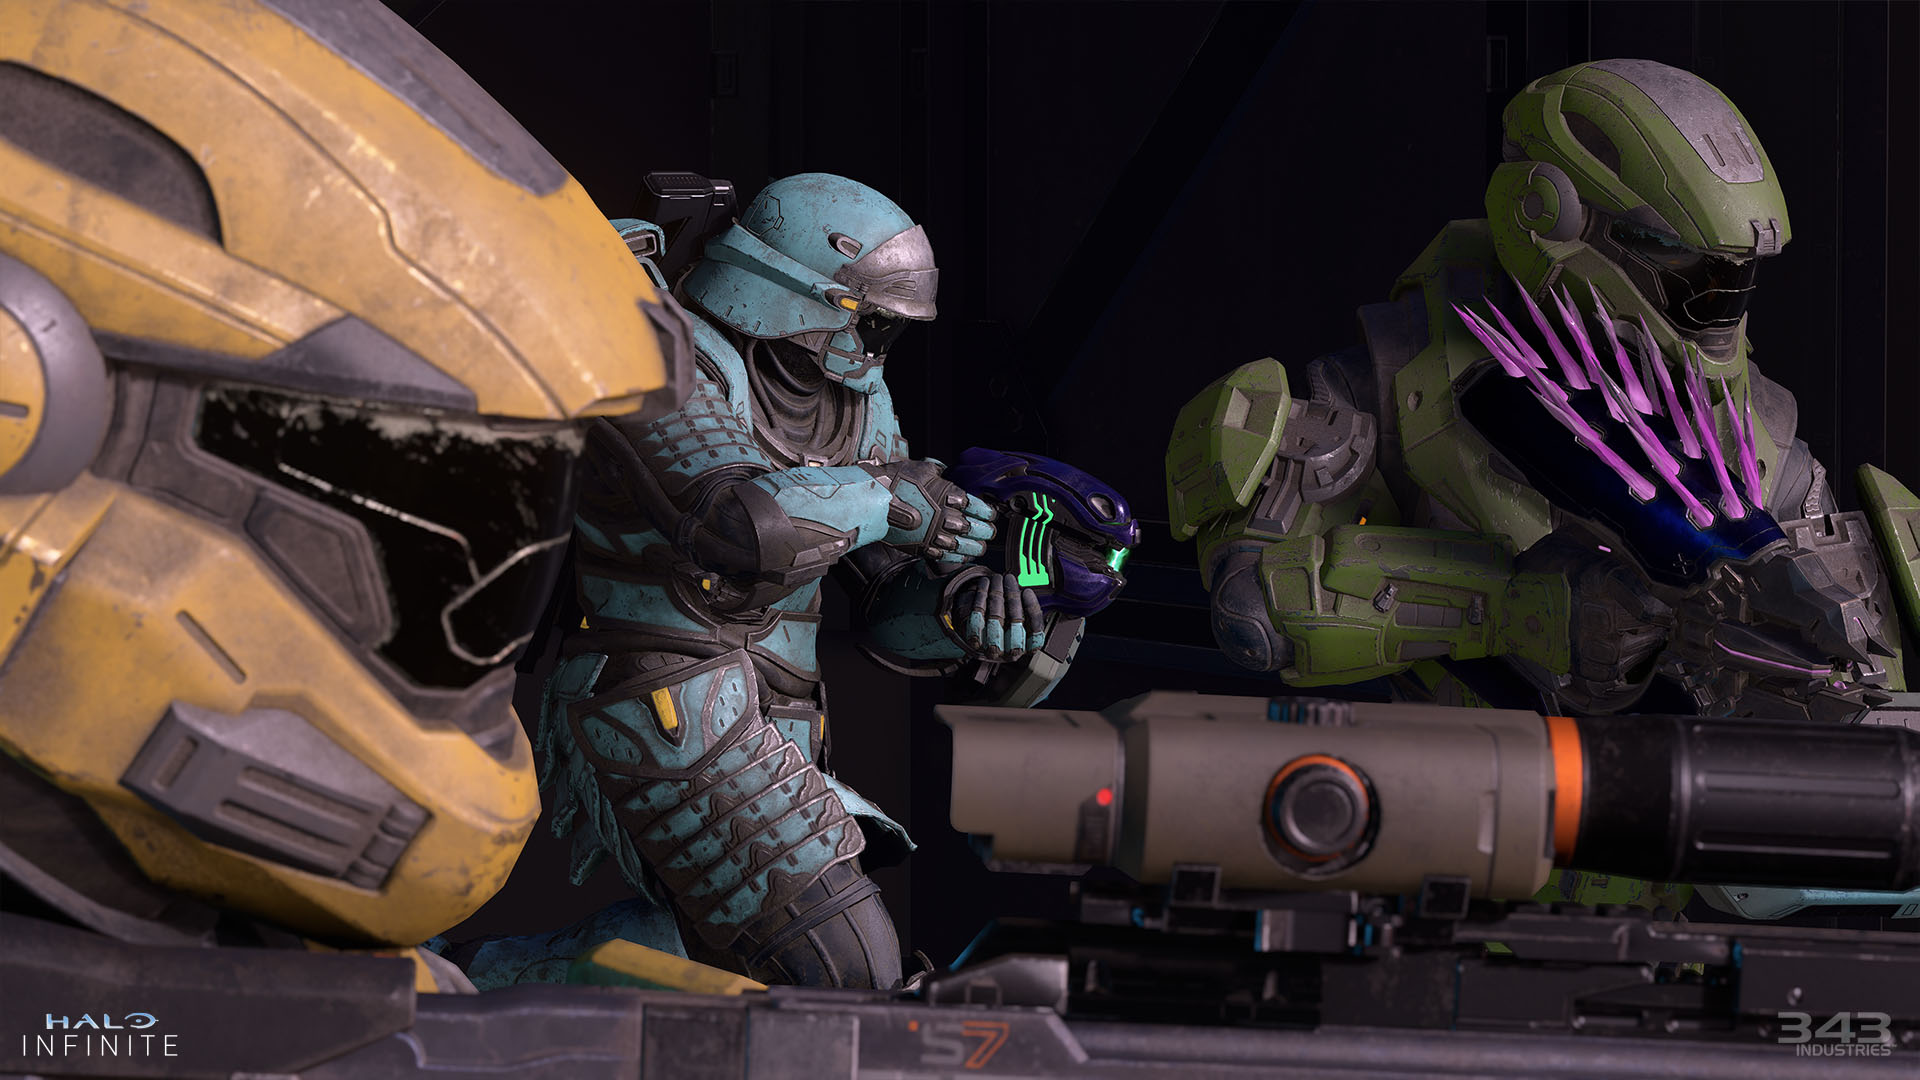 Halo Infinite action screenshot of multiple Spartan Armor Cores with Cadet Coatings